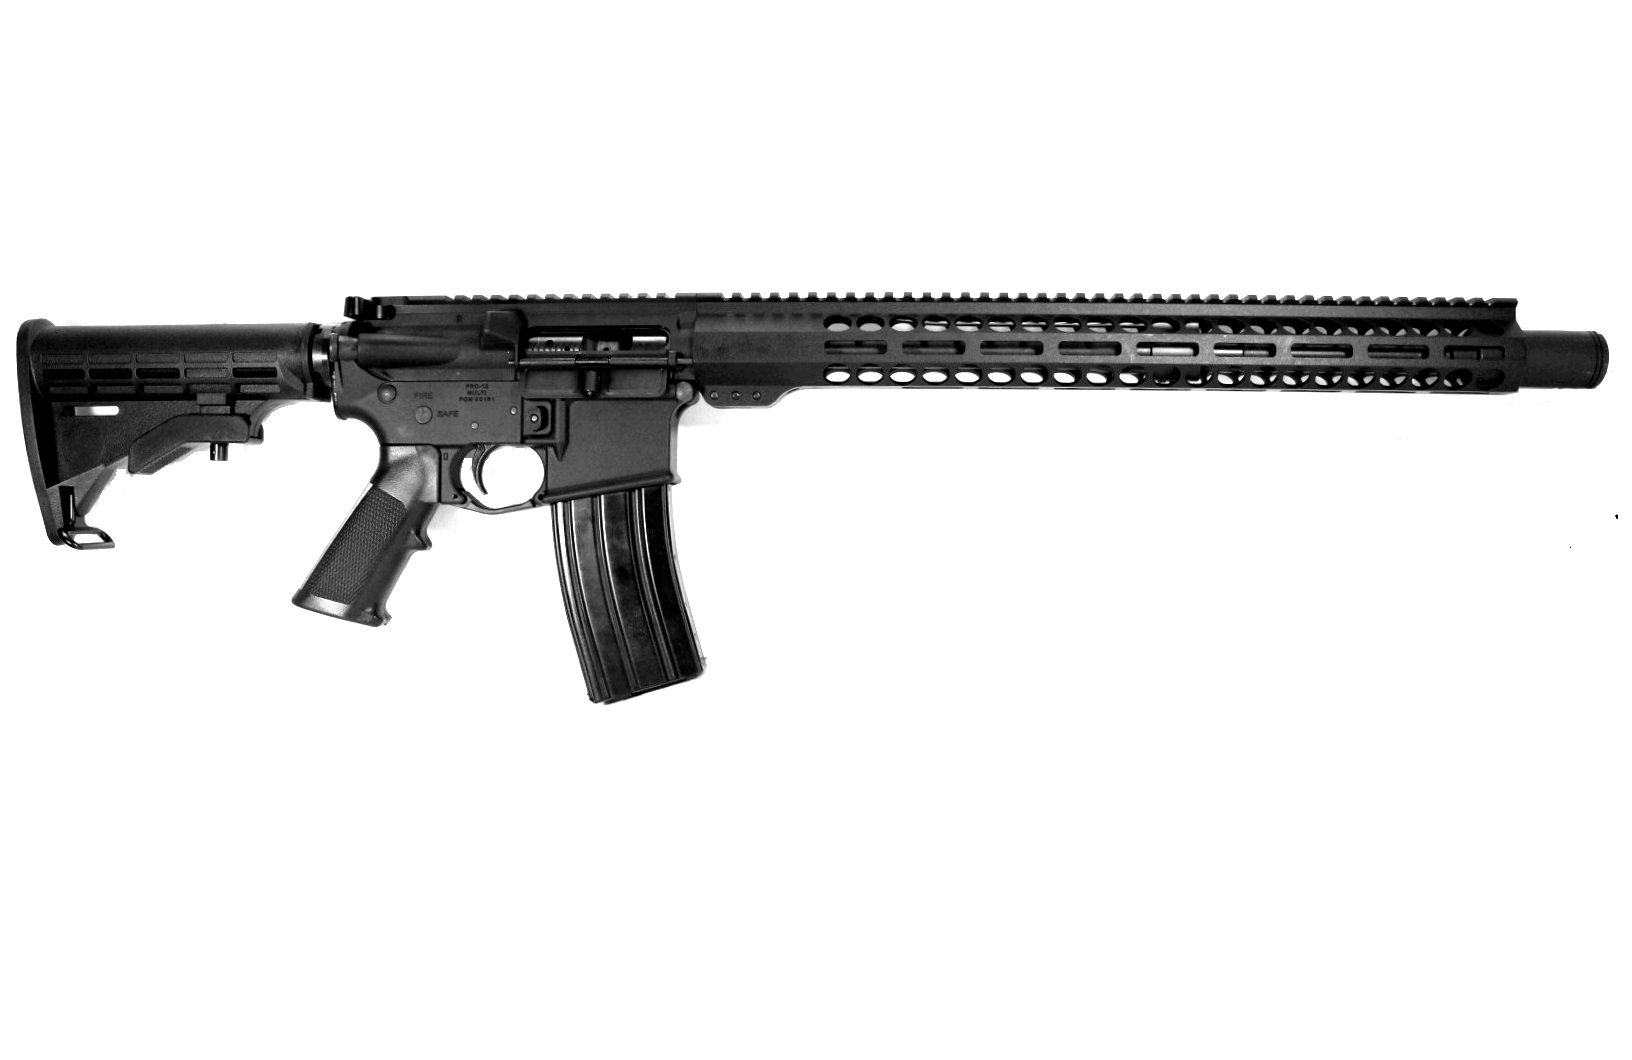 Pro2A Tactical's Patriot 16 inch AR-15 5.56 NATO M-LOK Complete Rifle with Flash Can